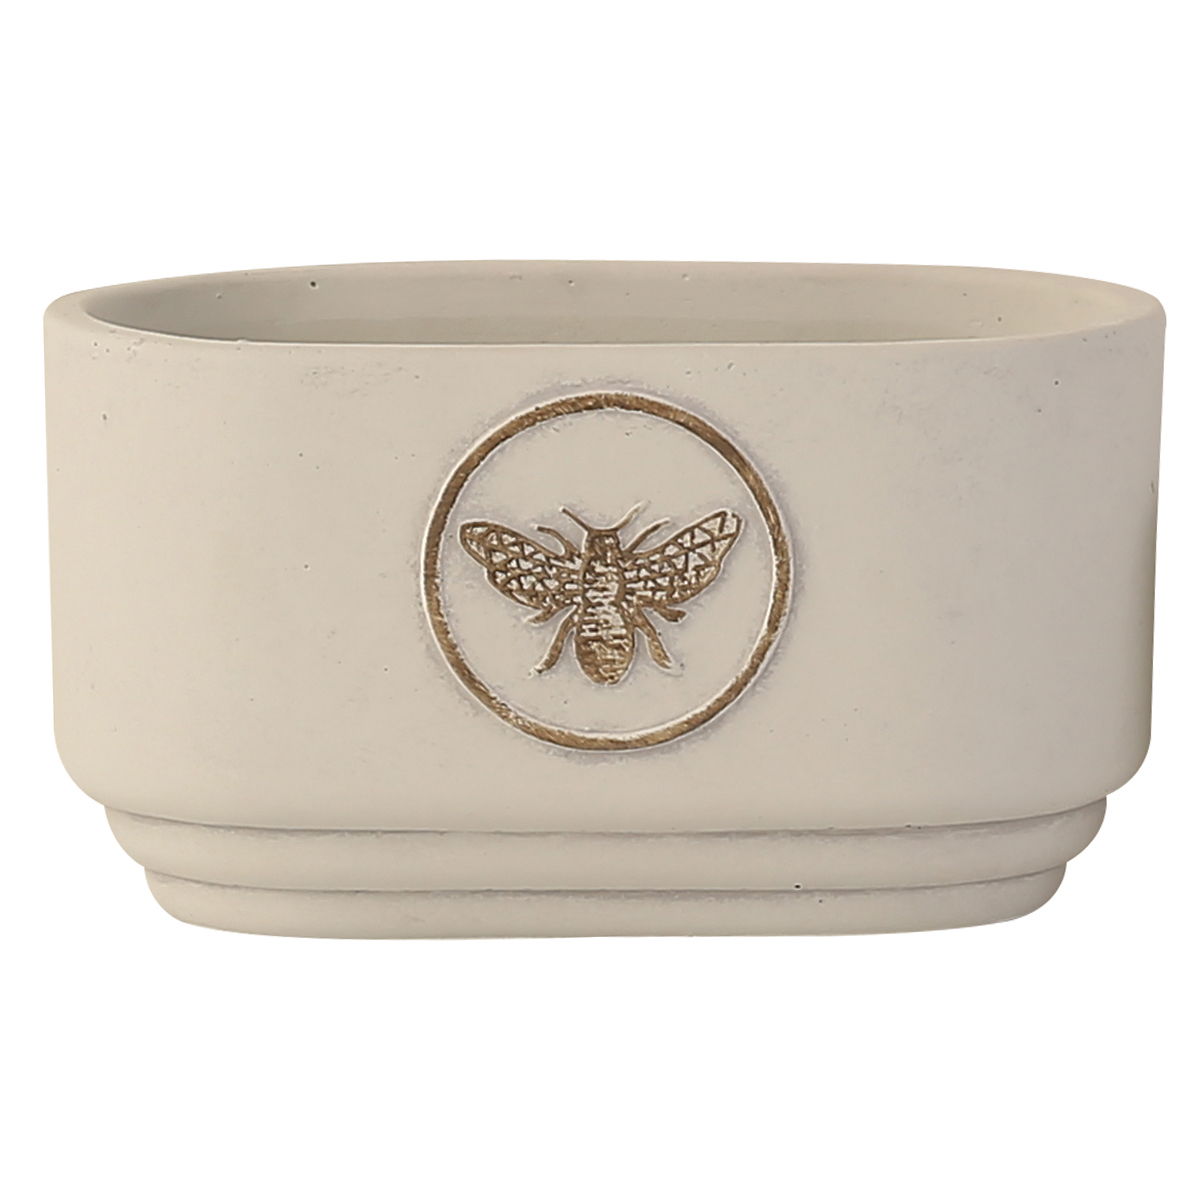 Picture of Queen Bee Trough Planter 14.5x8.5x8 cm